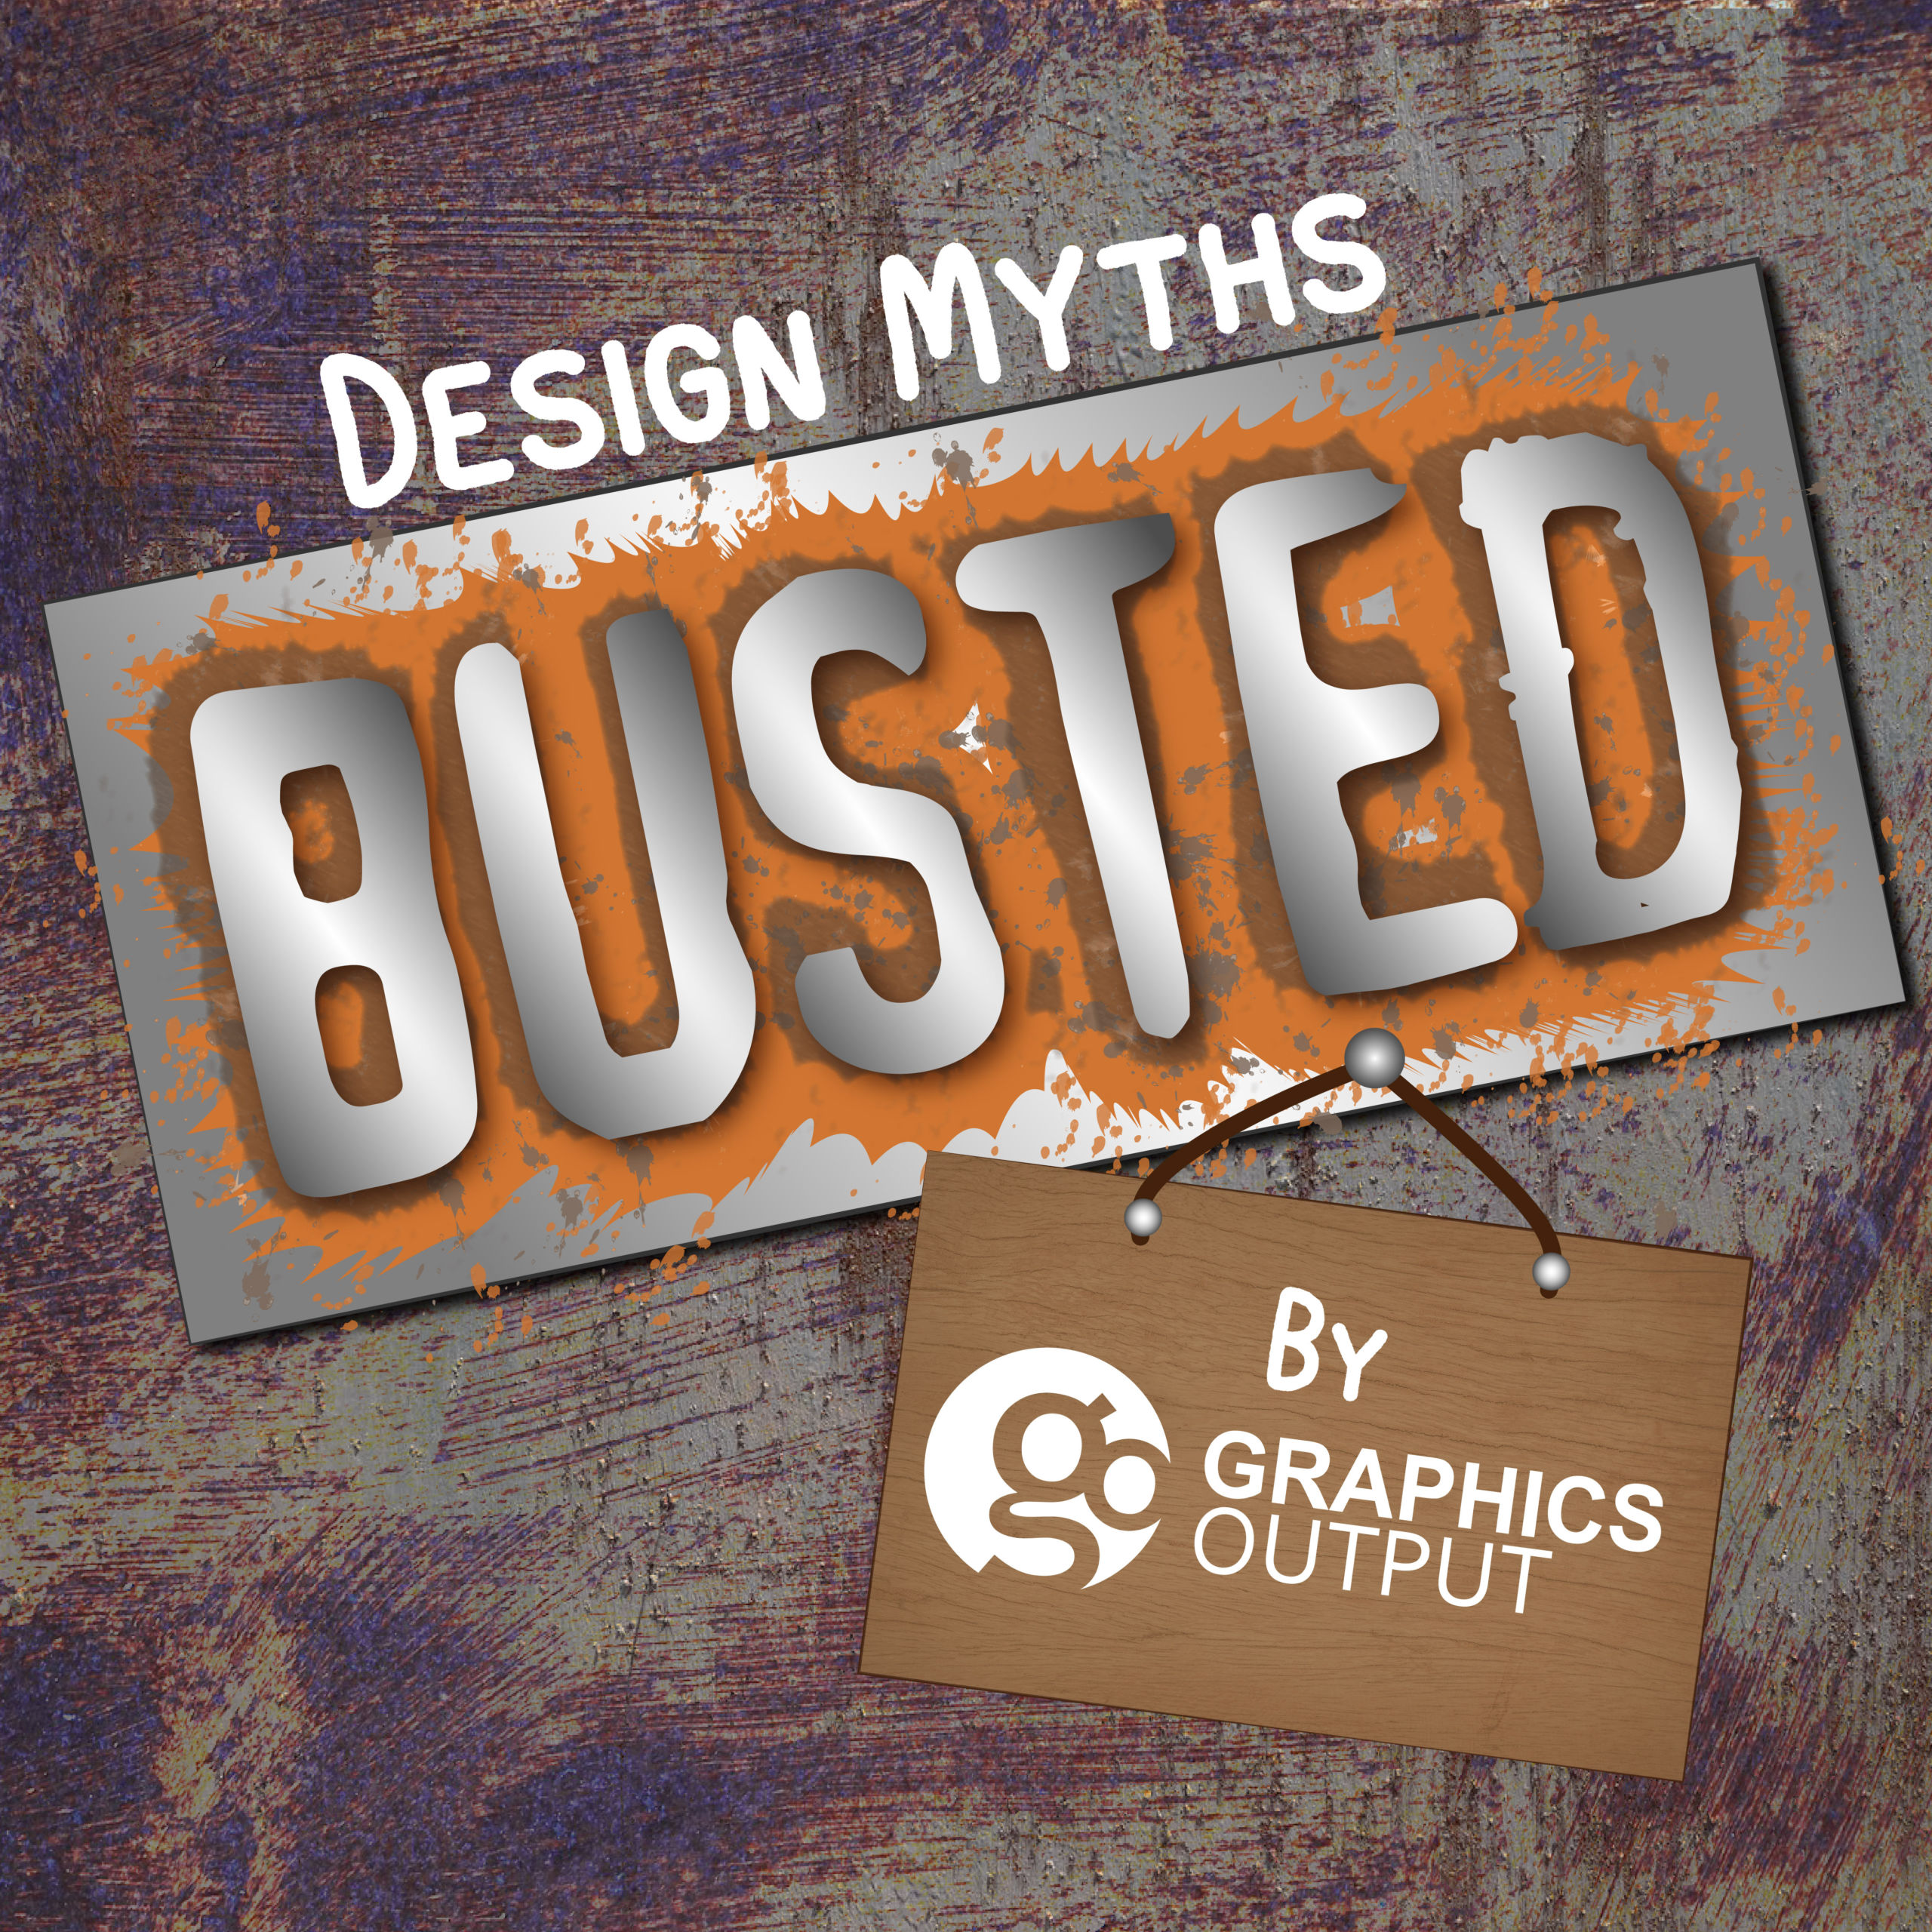 Design Myths Busted by Graphics Output